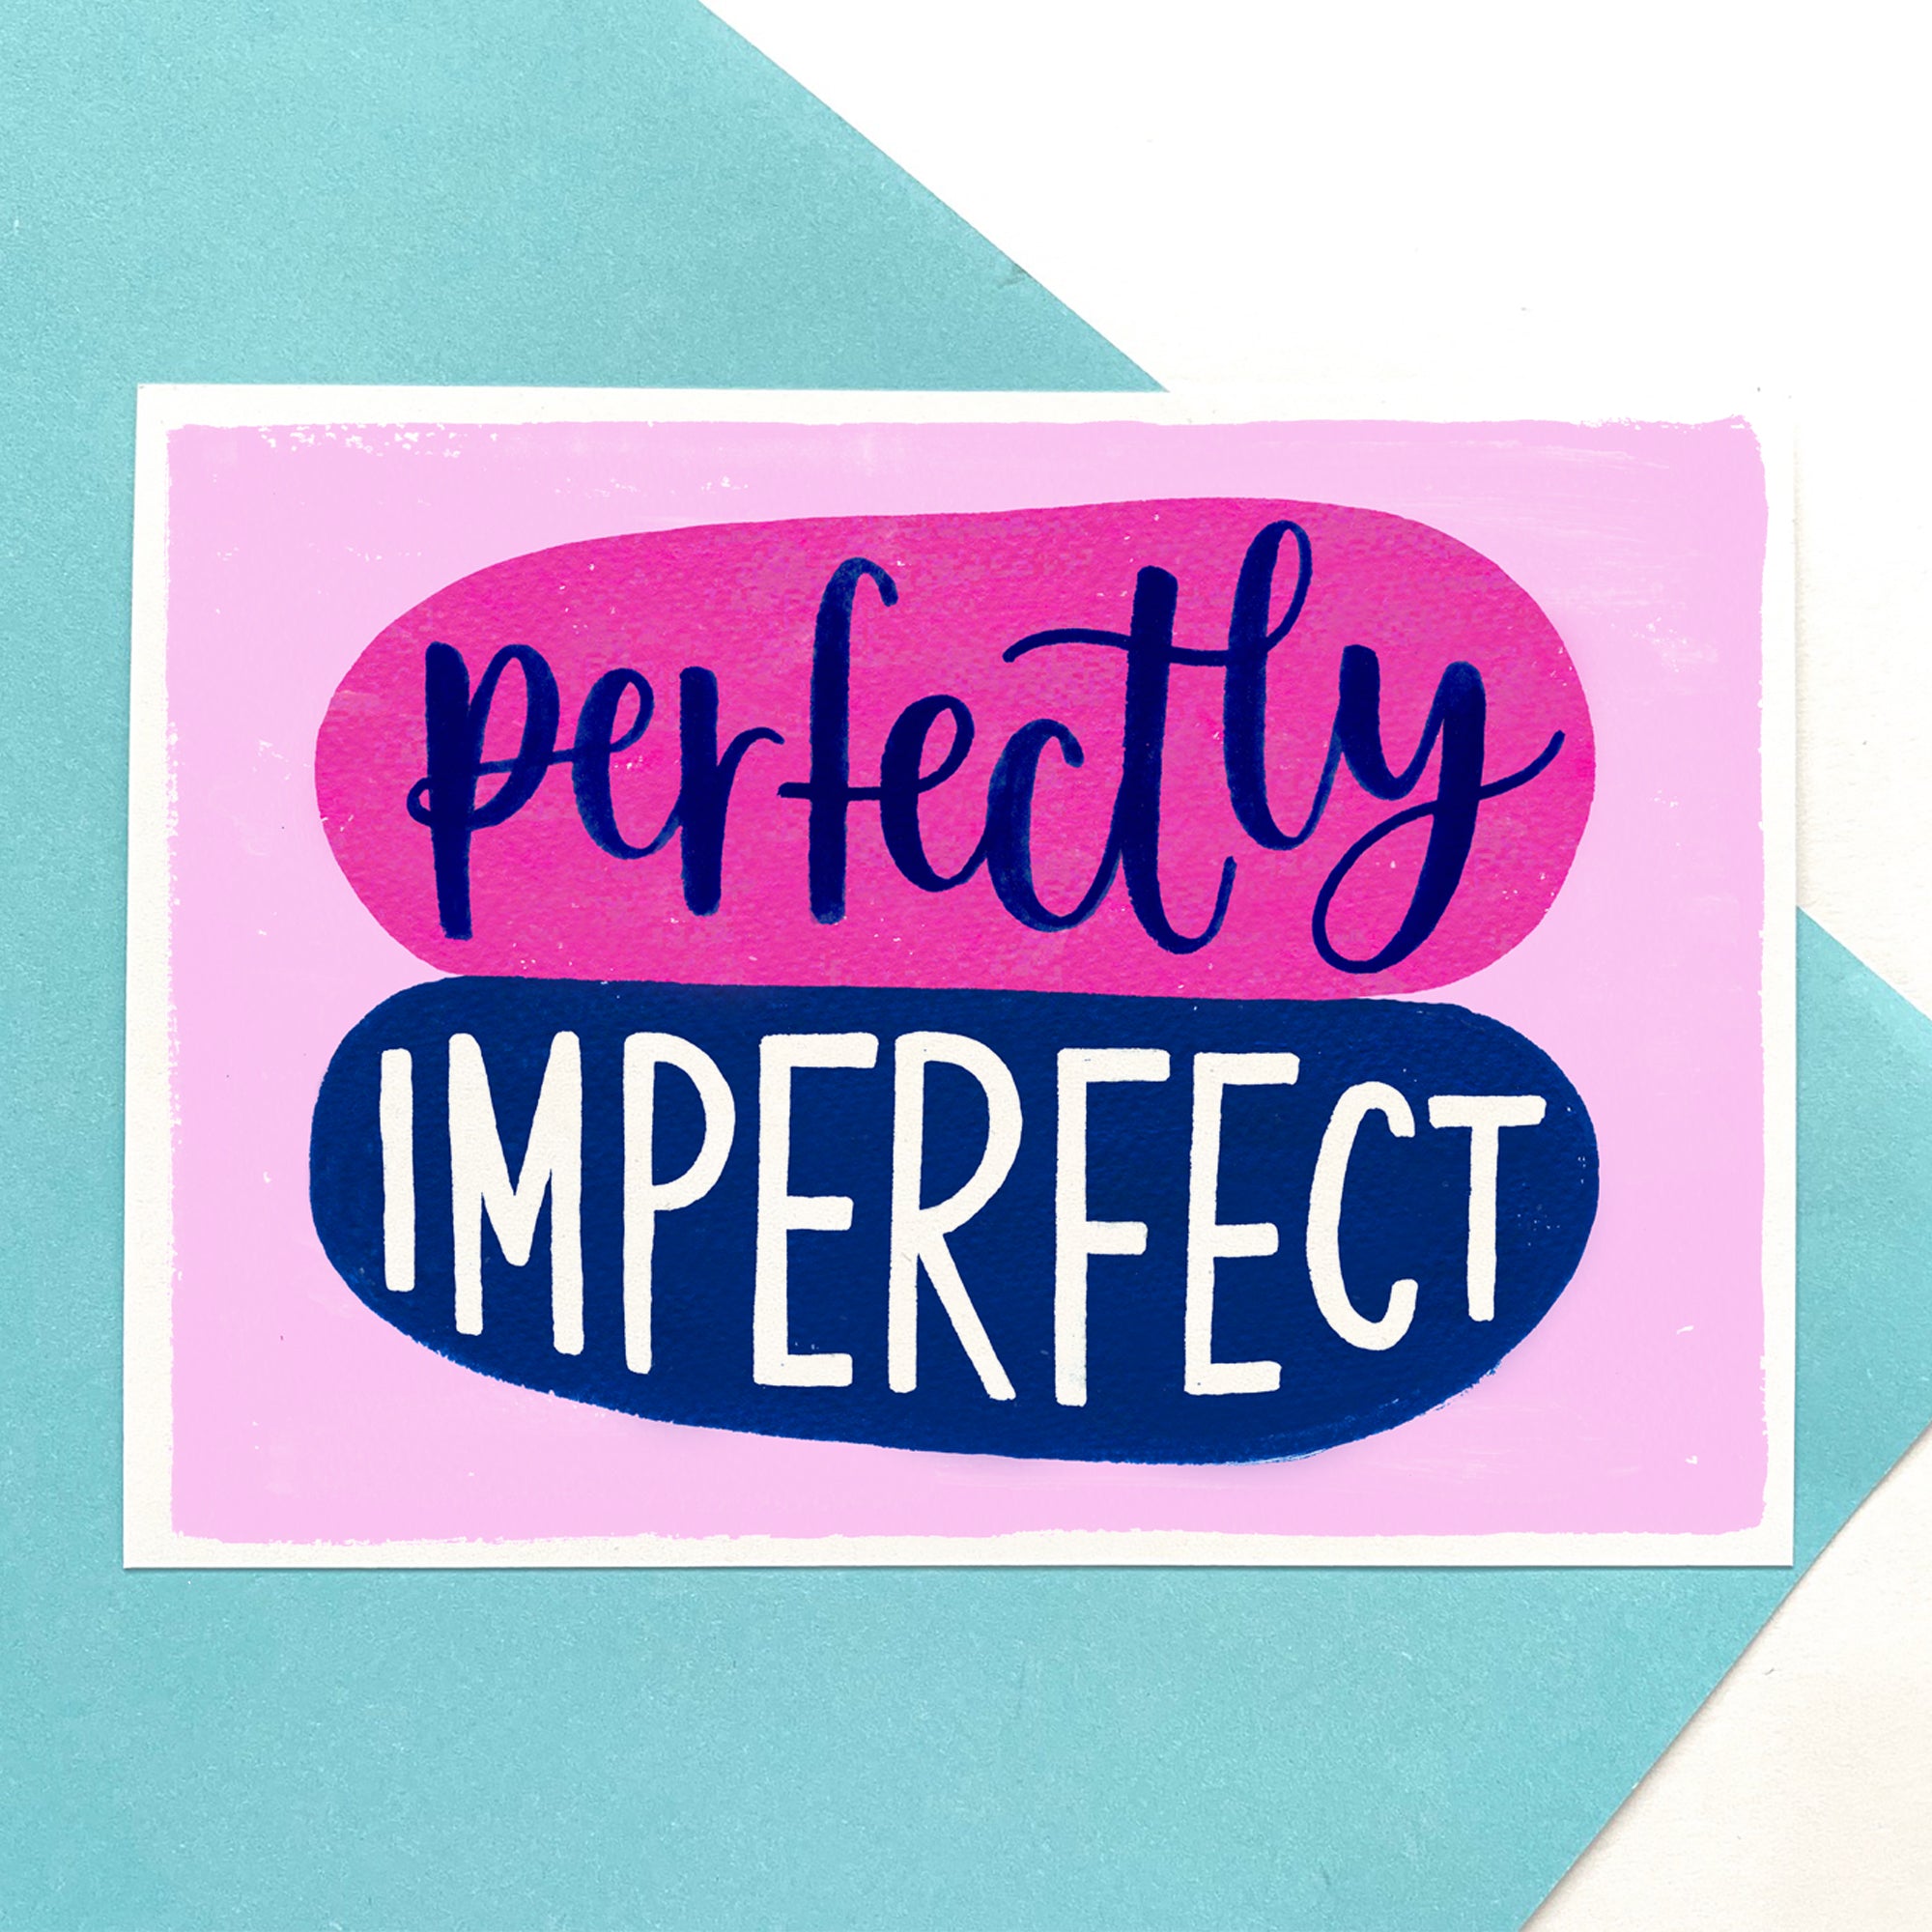 Perfectly imperfect - A6 postcard on recycled card